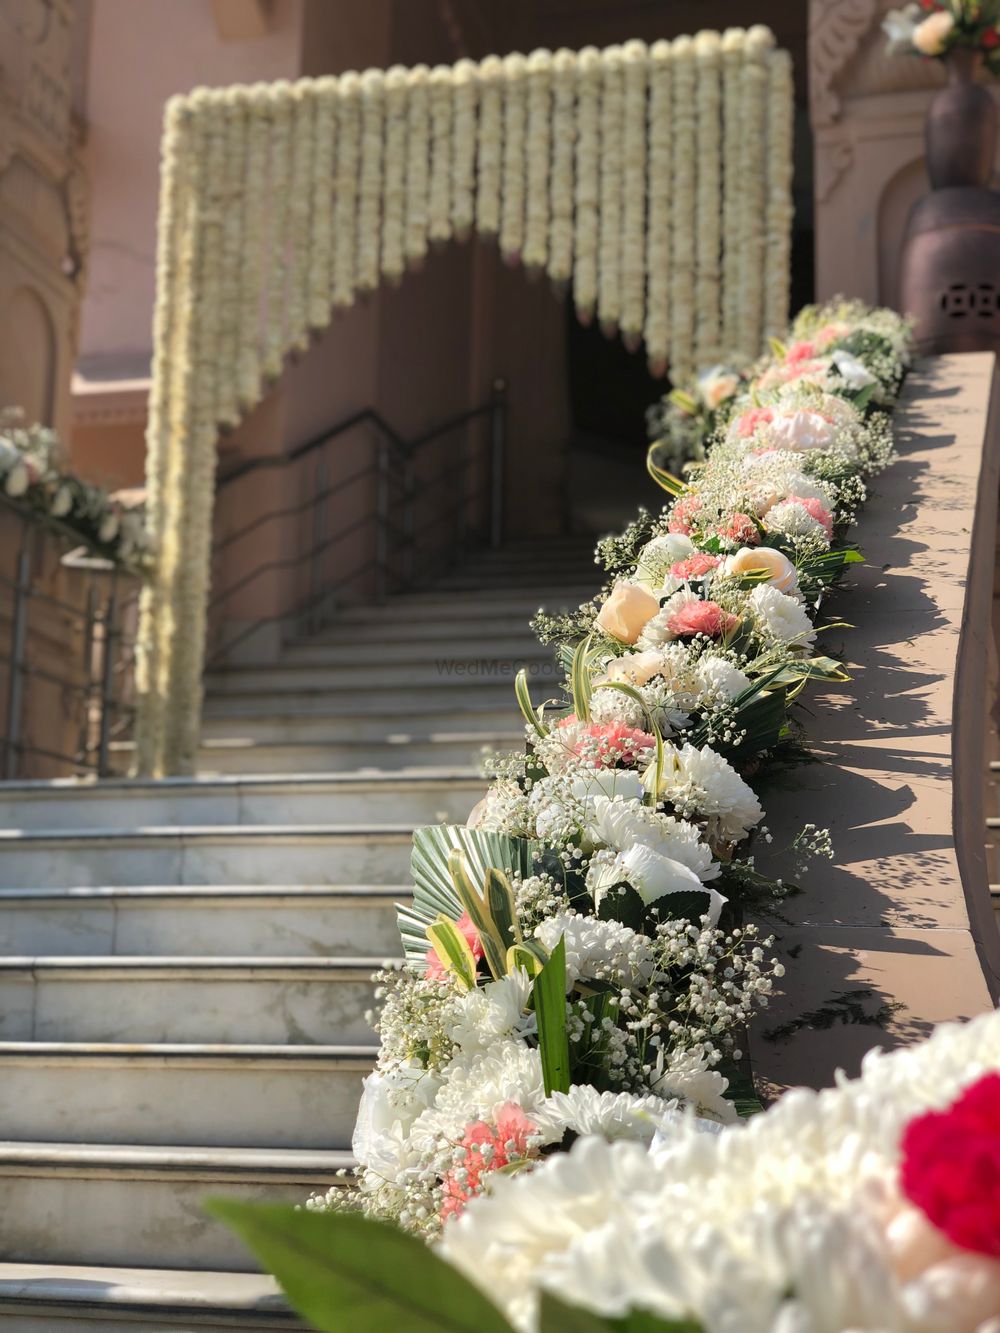 Photo of Floral decor for stairway